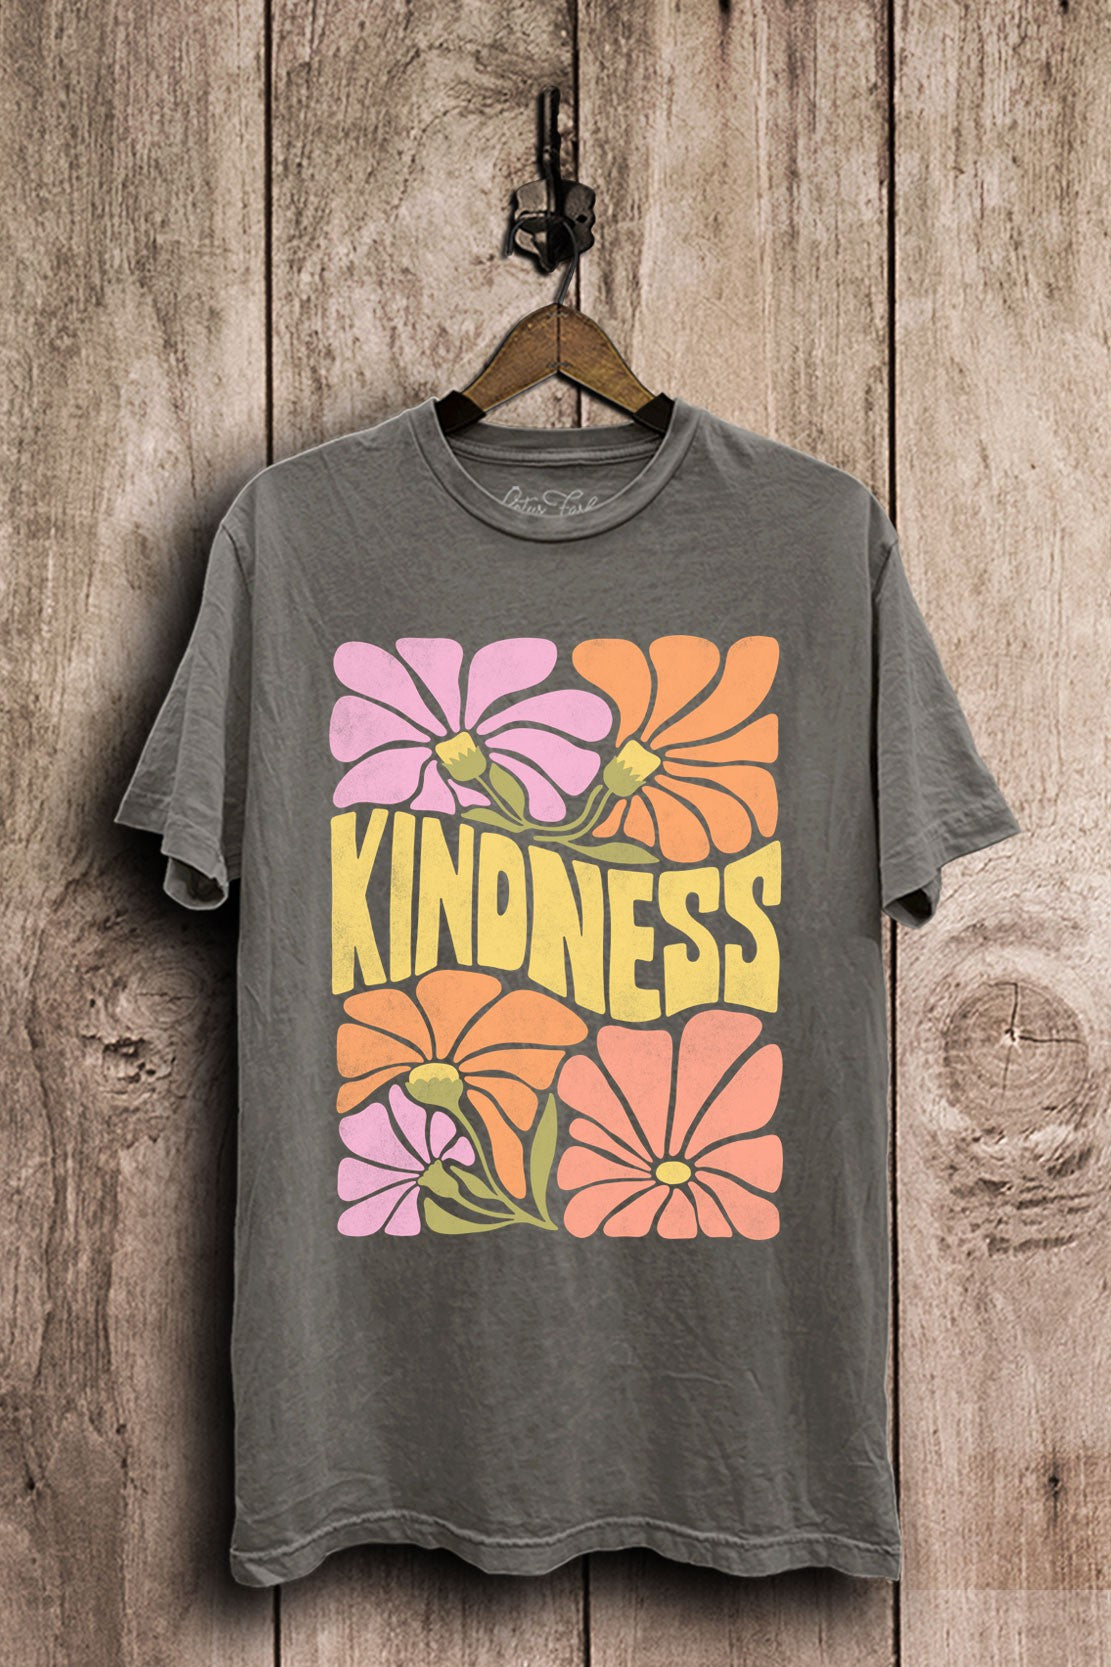 KINDNESS GRAPHIC TOP